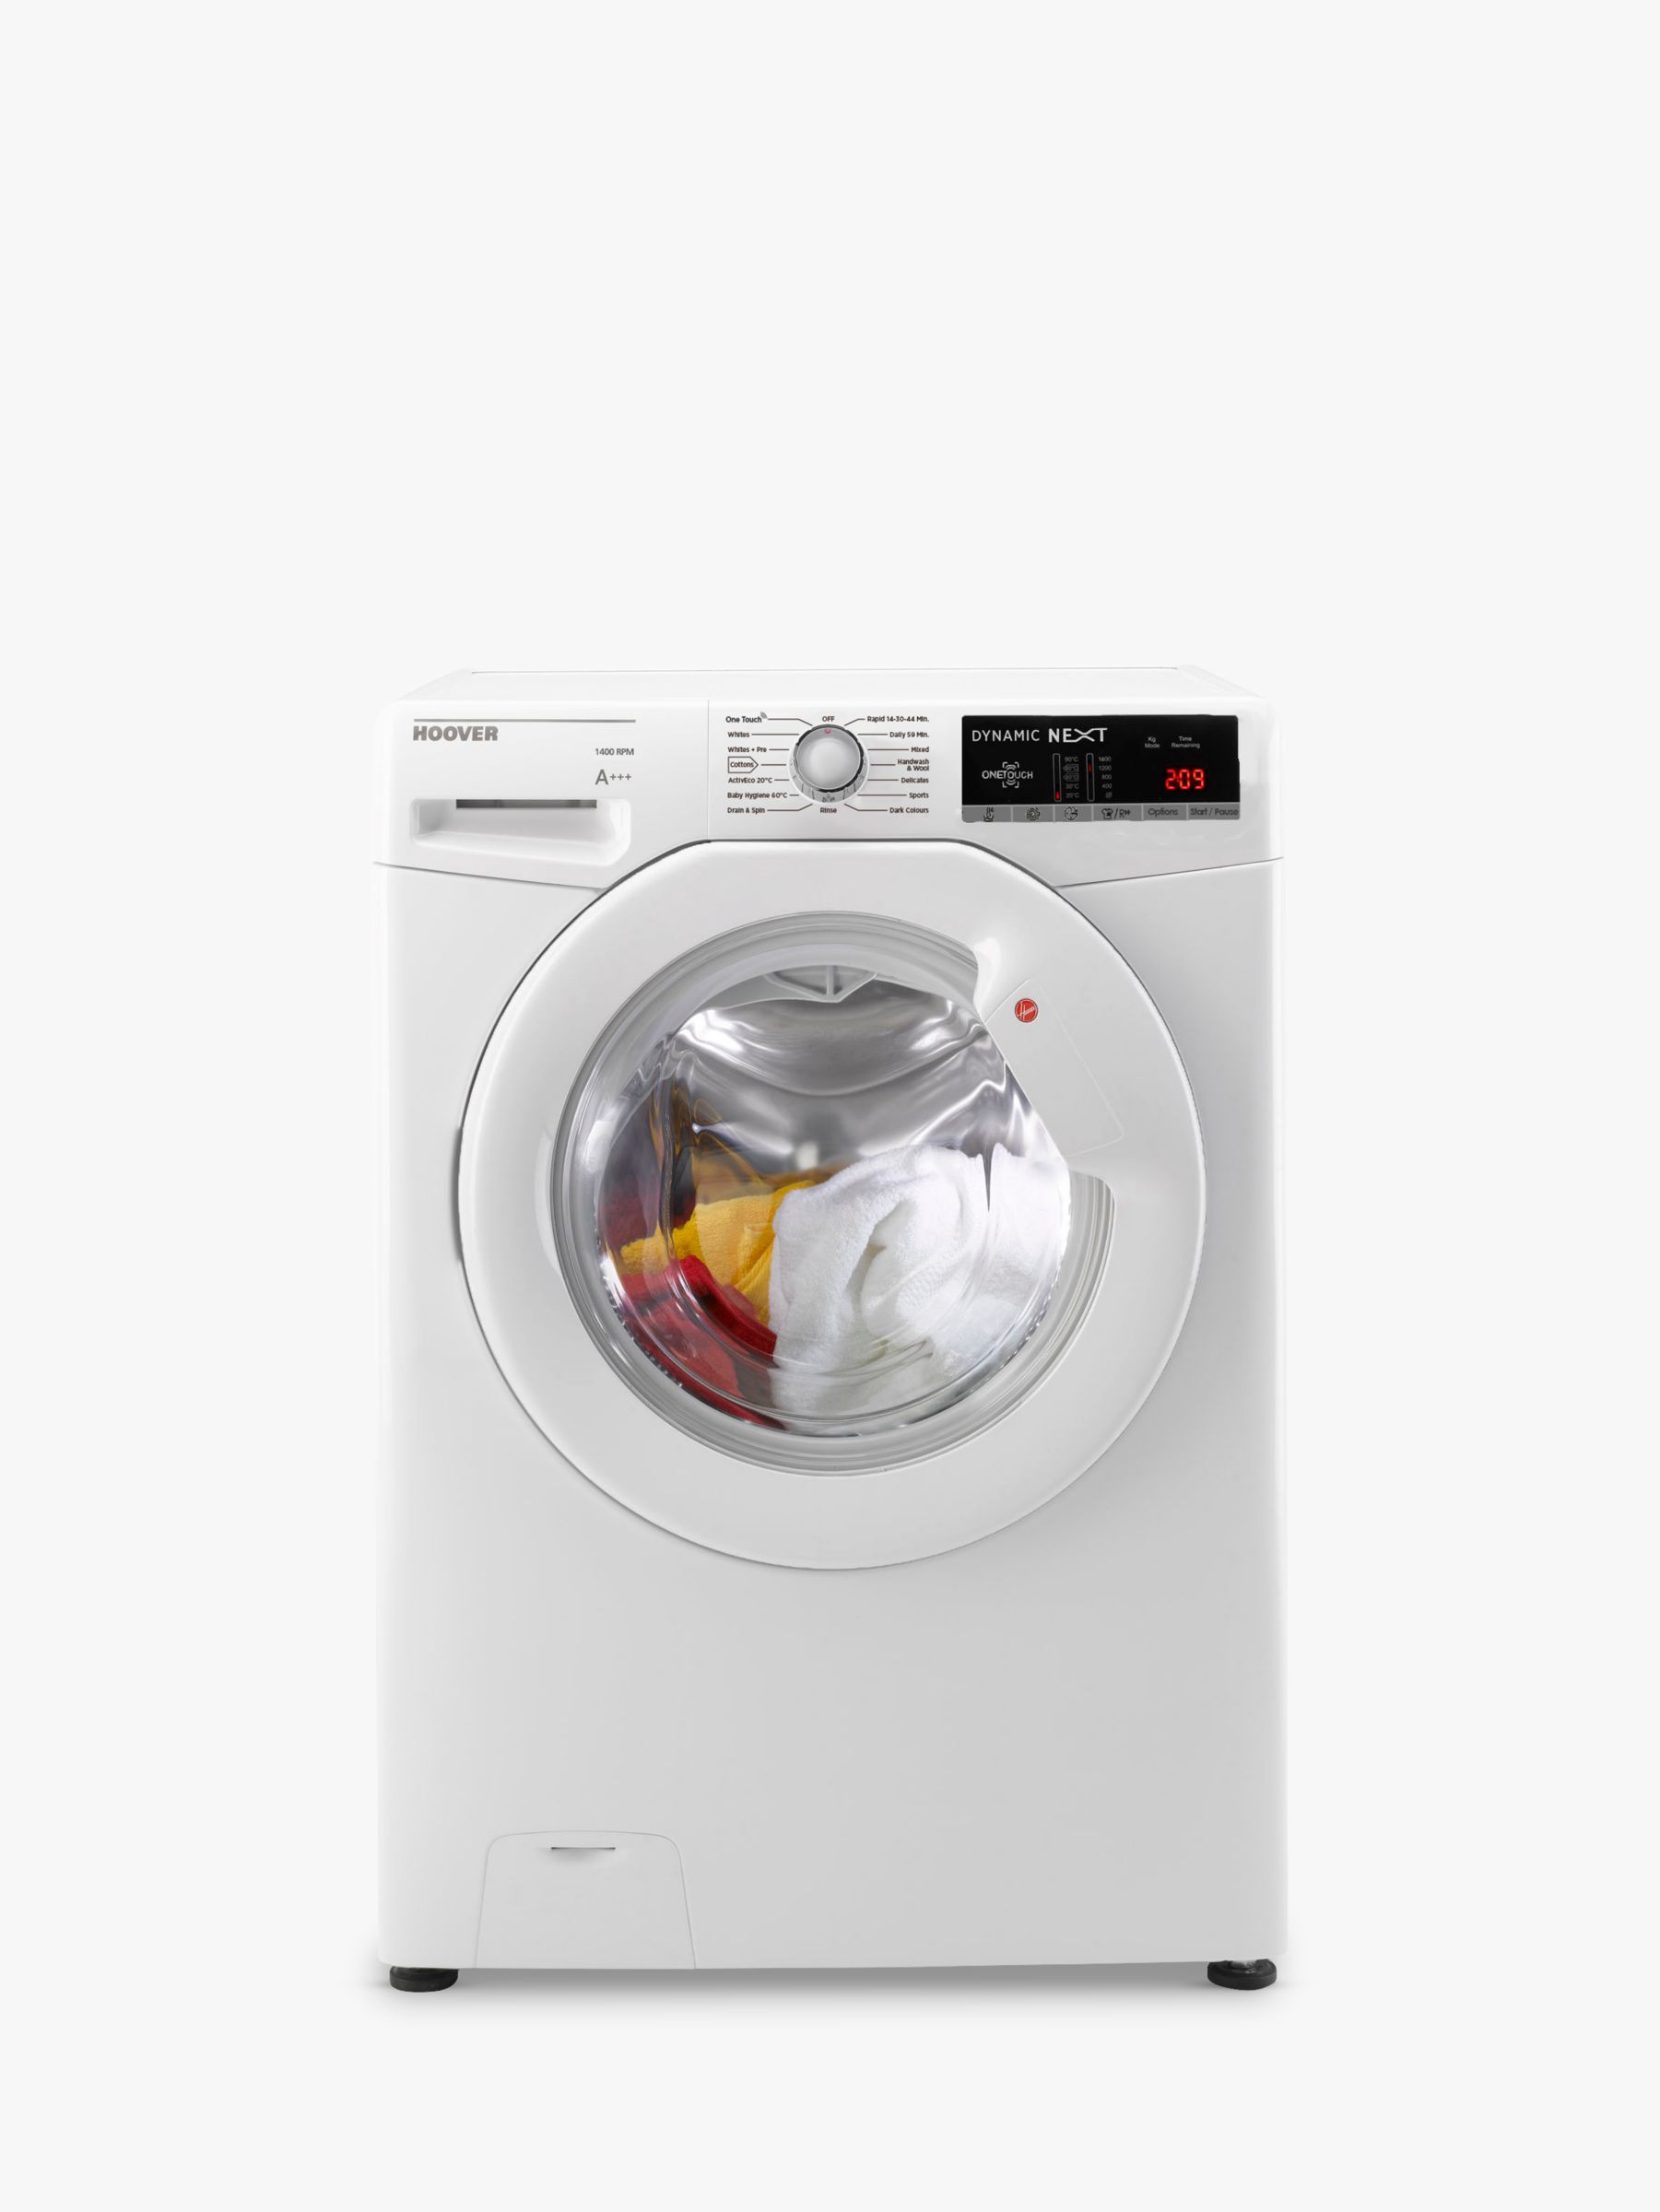 Hoover DXOA1473LW3 Freestanding Washing Machine, 7kg Load, A+++ Energy Rating, 1400rpm Spin, White